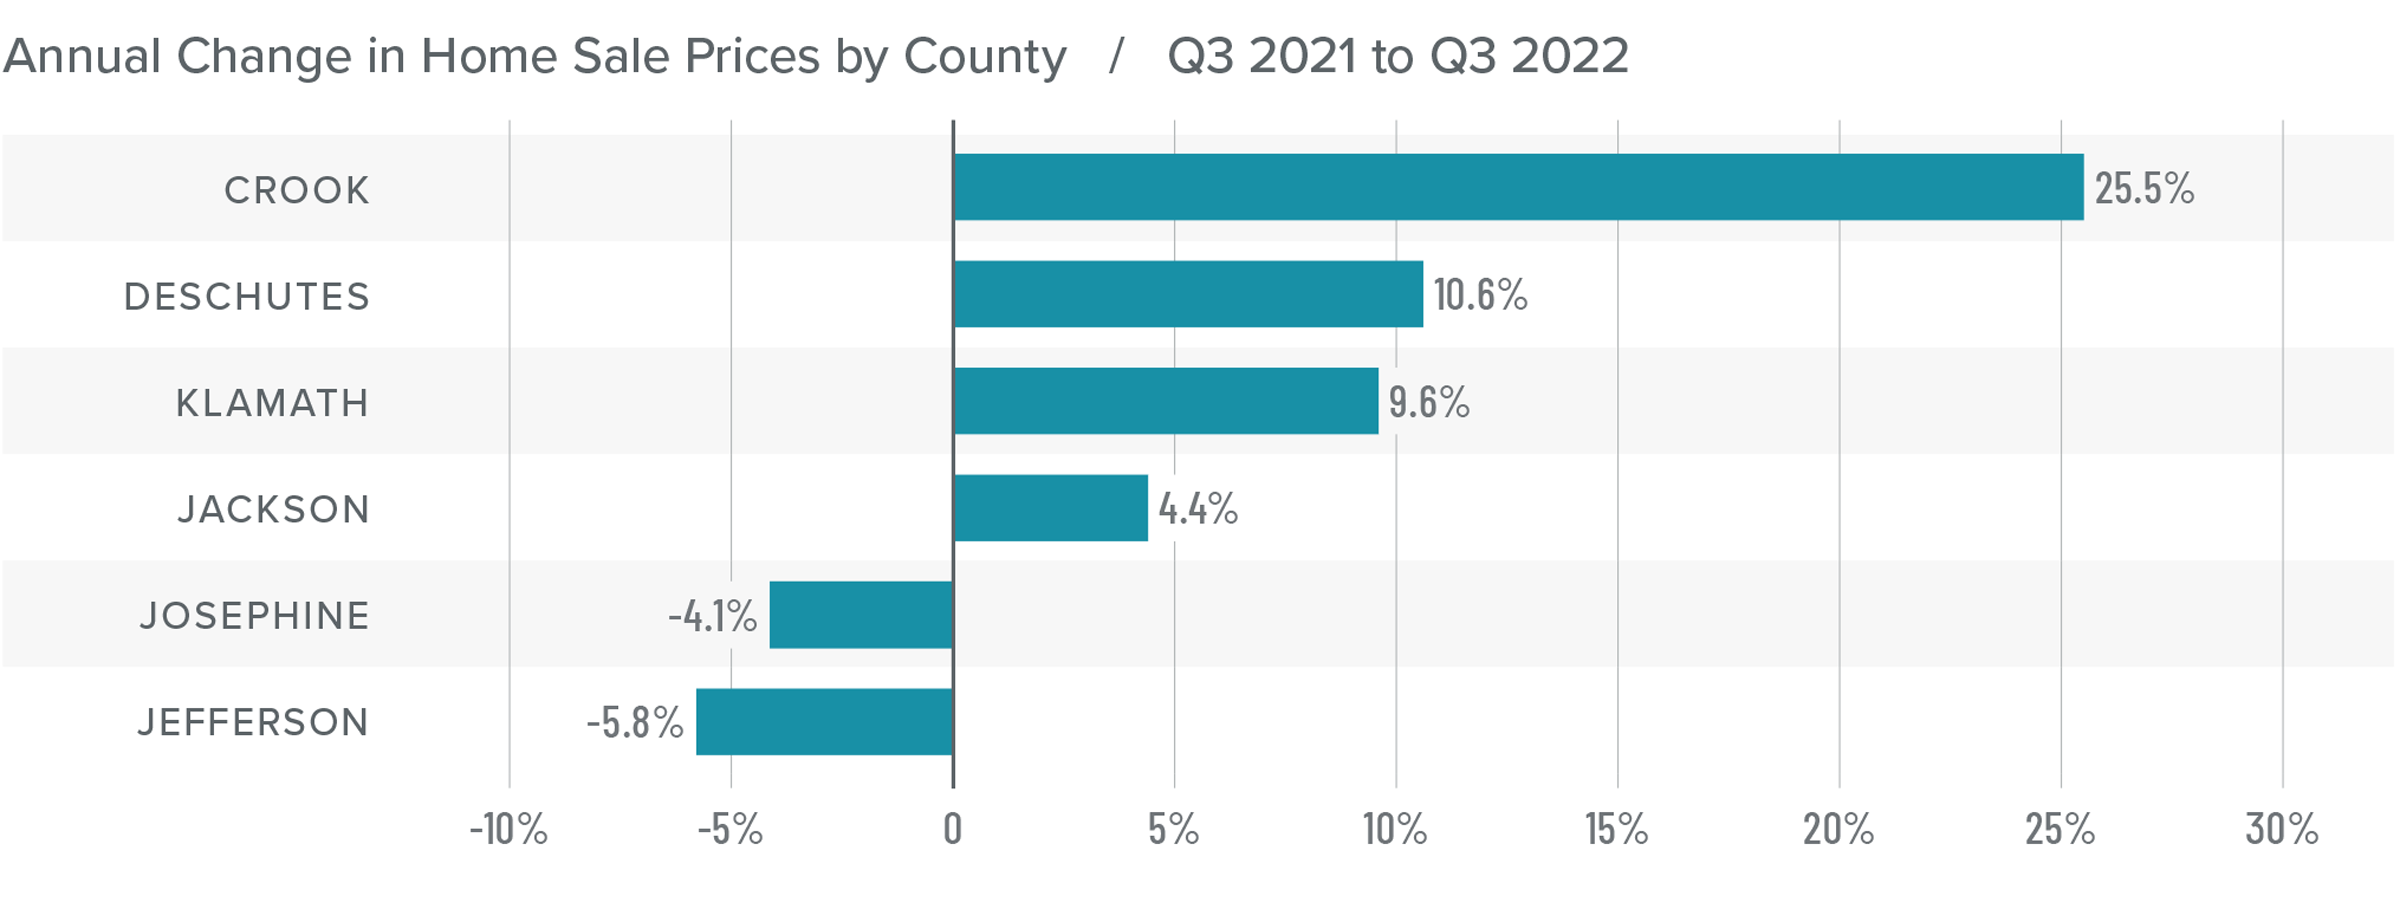 A bar graph showing the annual change in home sale prices for various counties in Central and Southern Oregon from Q3 2021 to Q3 2022. Crook county tops the list at 25.5%, followed by Deschutes at 10.6%, Klamath at 9.6%, Jackson at 4.4%, Josephine at -4.1%, and Jefferson at -5.8%.